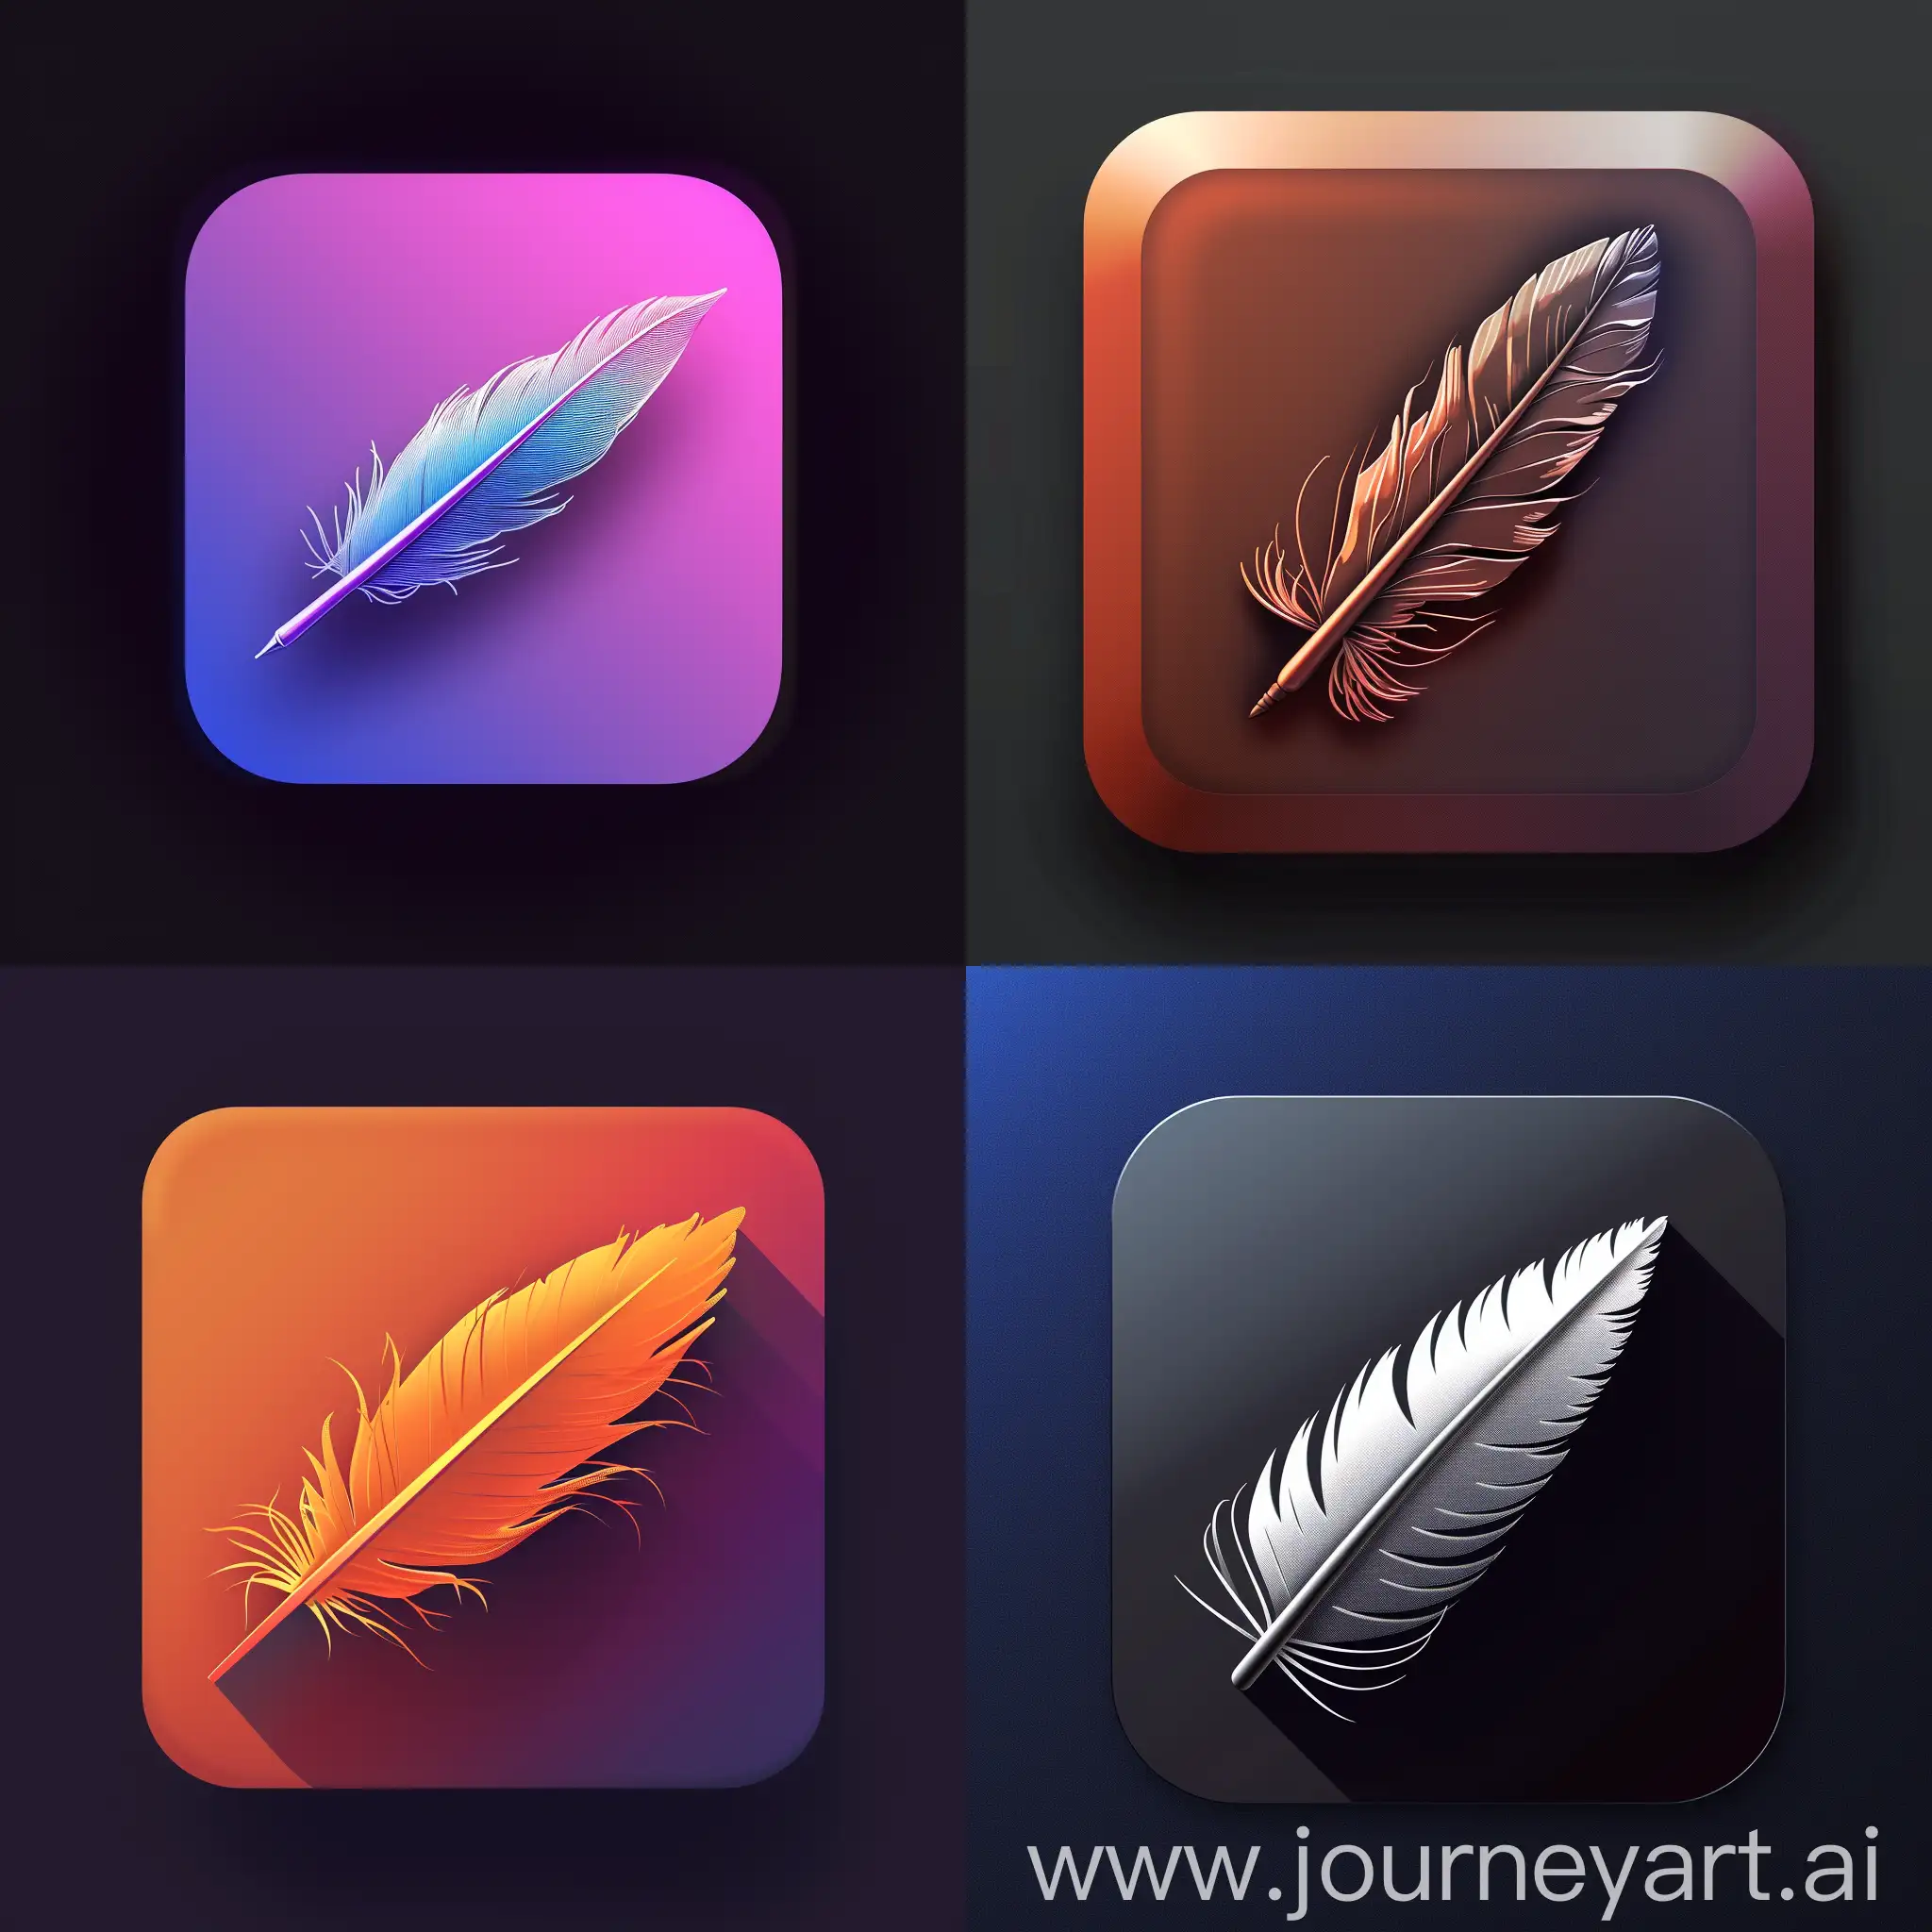 Minimalistic-Square-App-Icon-with-Round-Edges-and-Quill